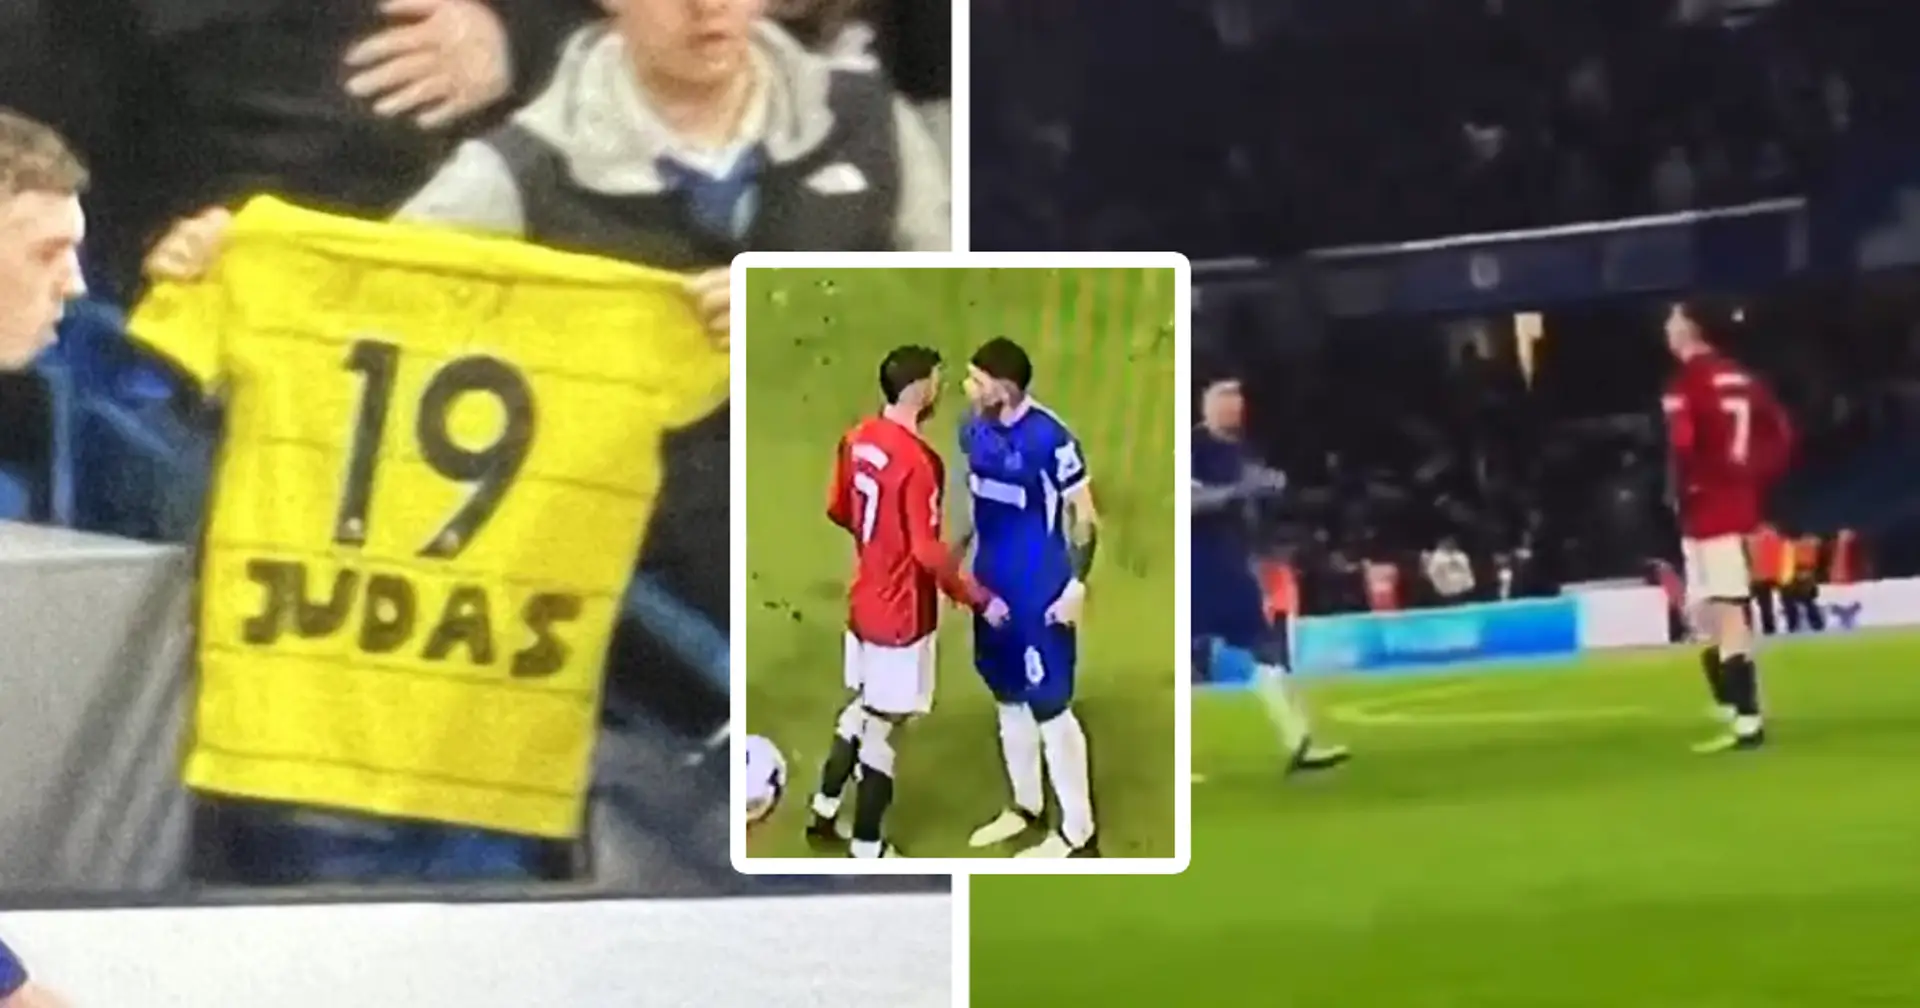 How Chelsea fans reacted to Mason Mount entering the pitch - even the Chelsea players reacted to his substitute